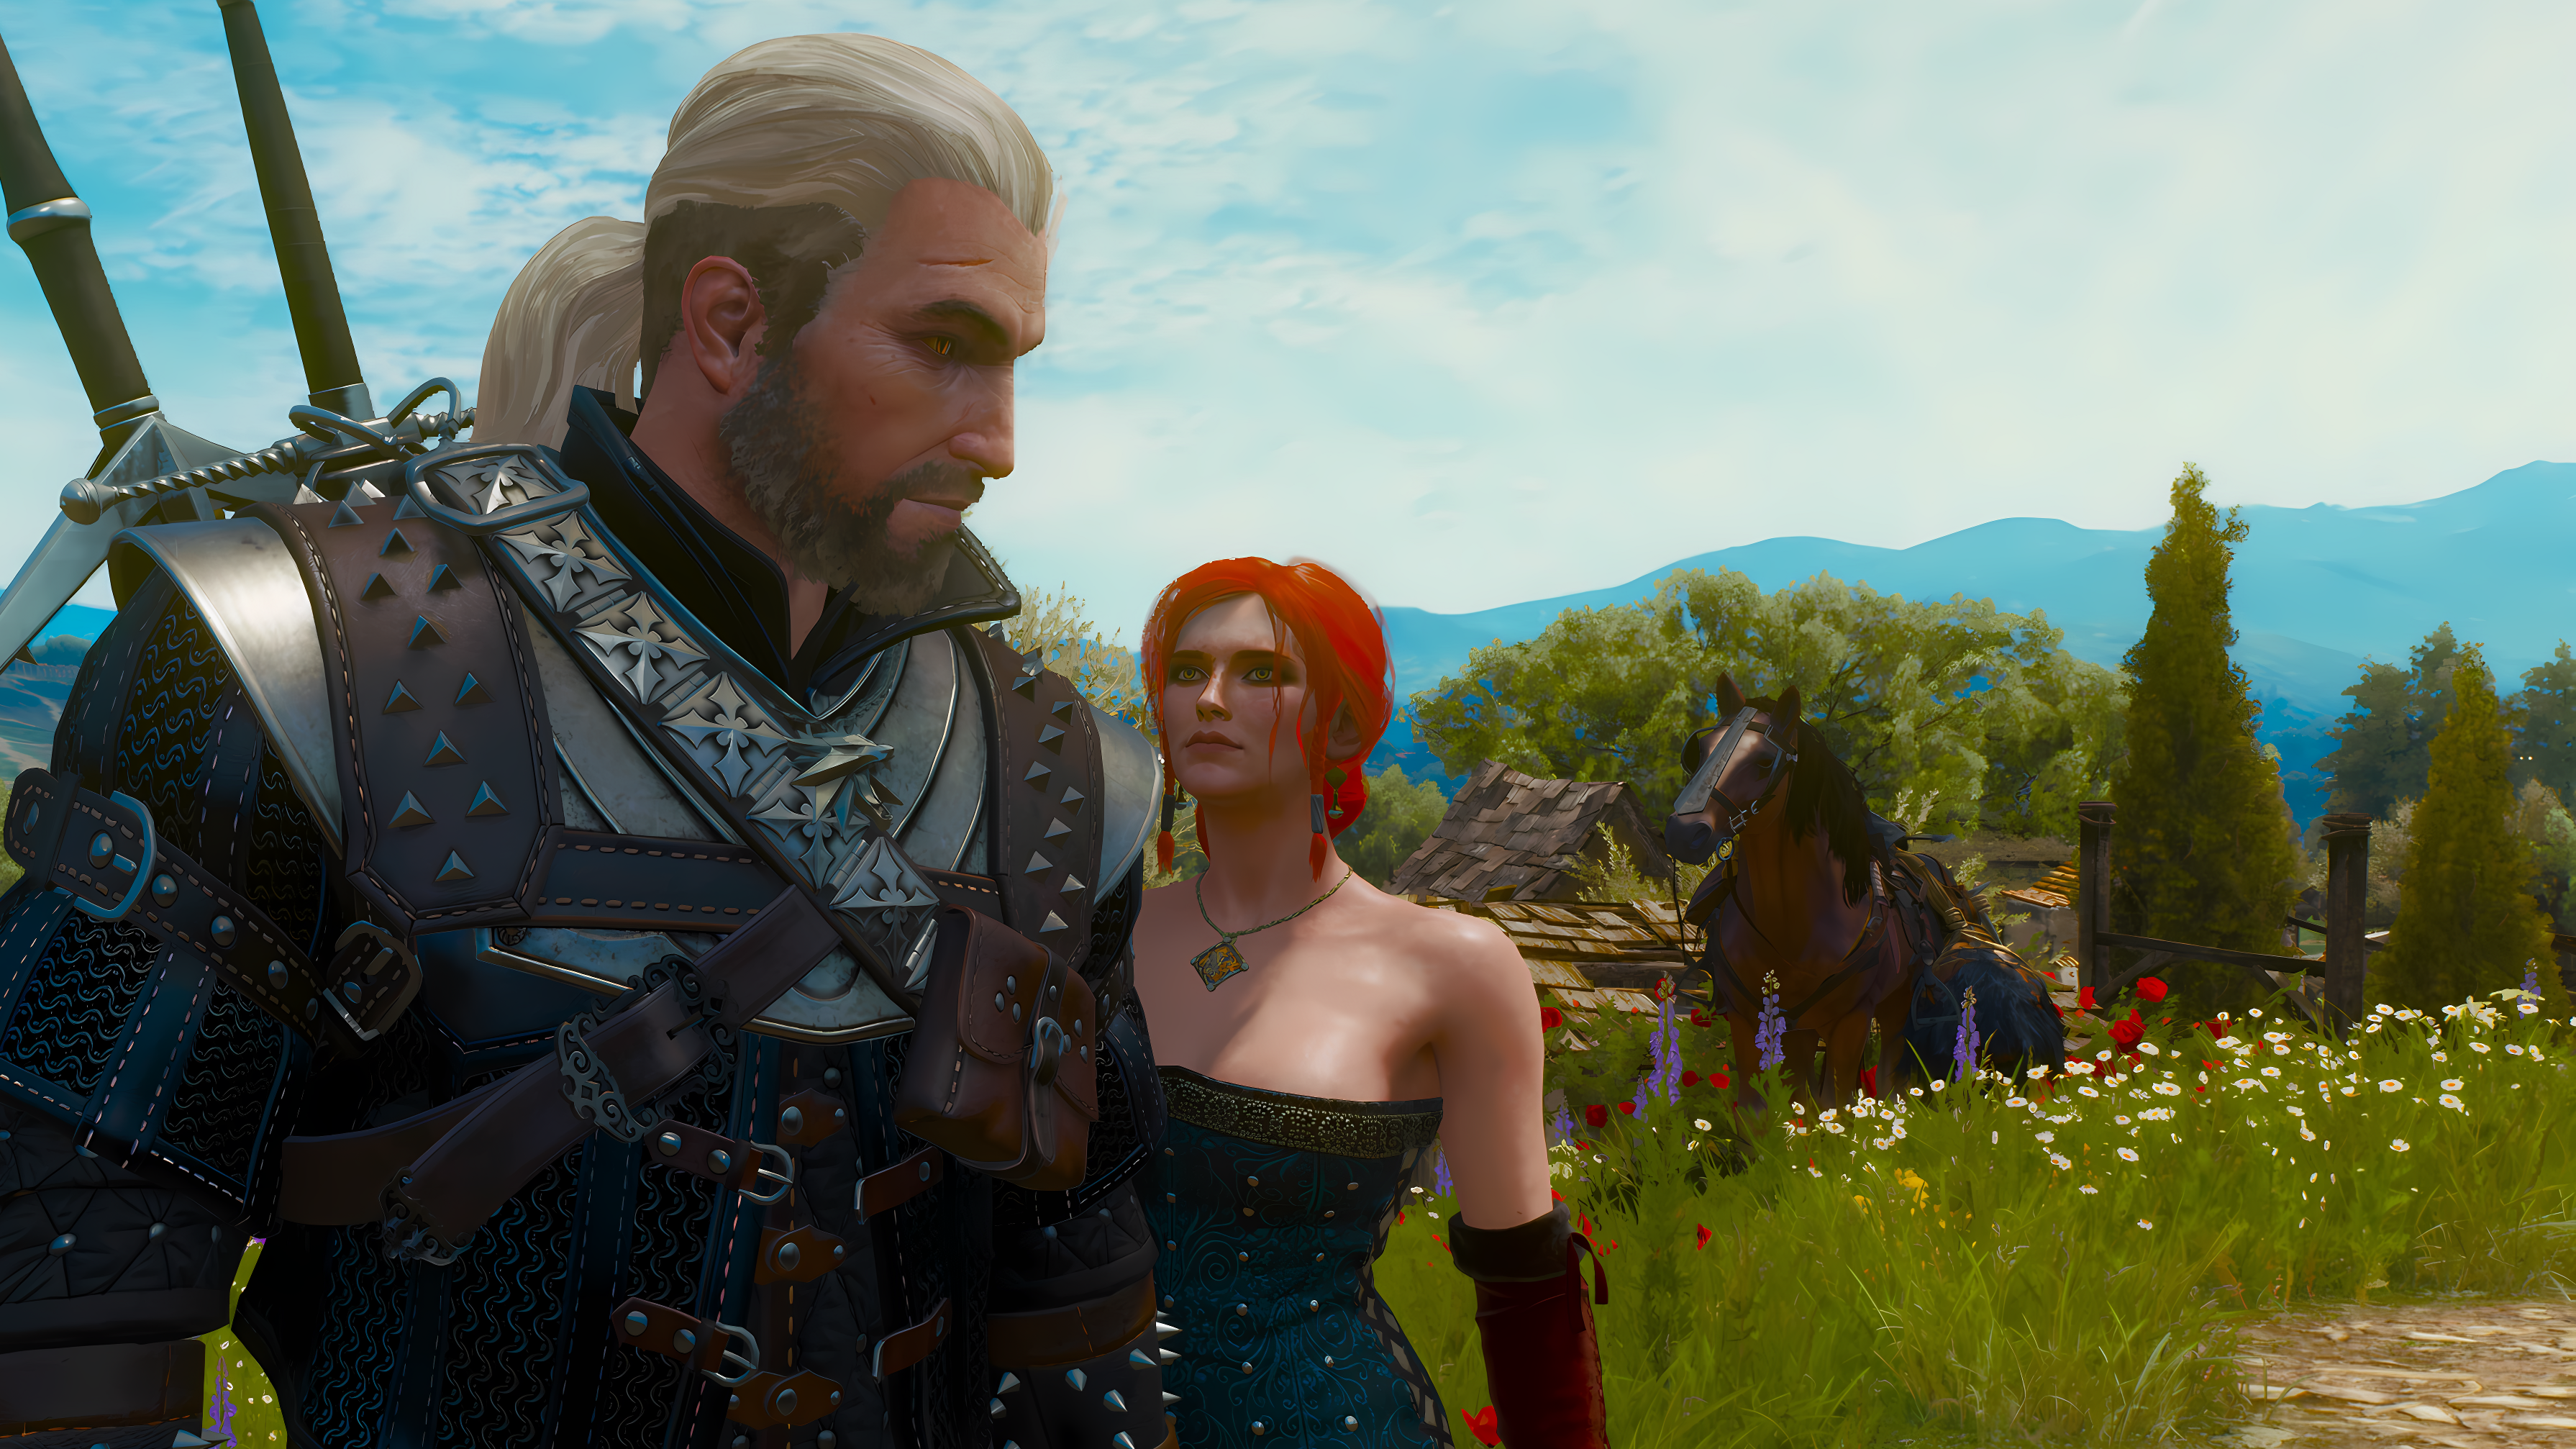 Anime 3581x2014 The Witcher 3: Wild Hunt Triss Merigold video games video game characters CGI flowers